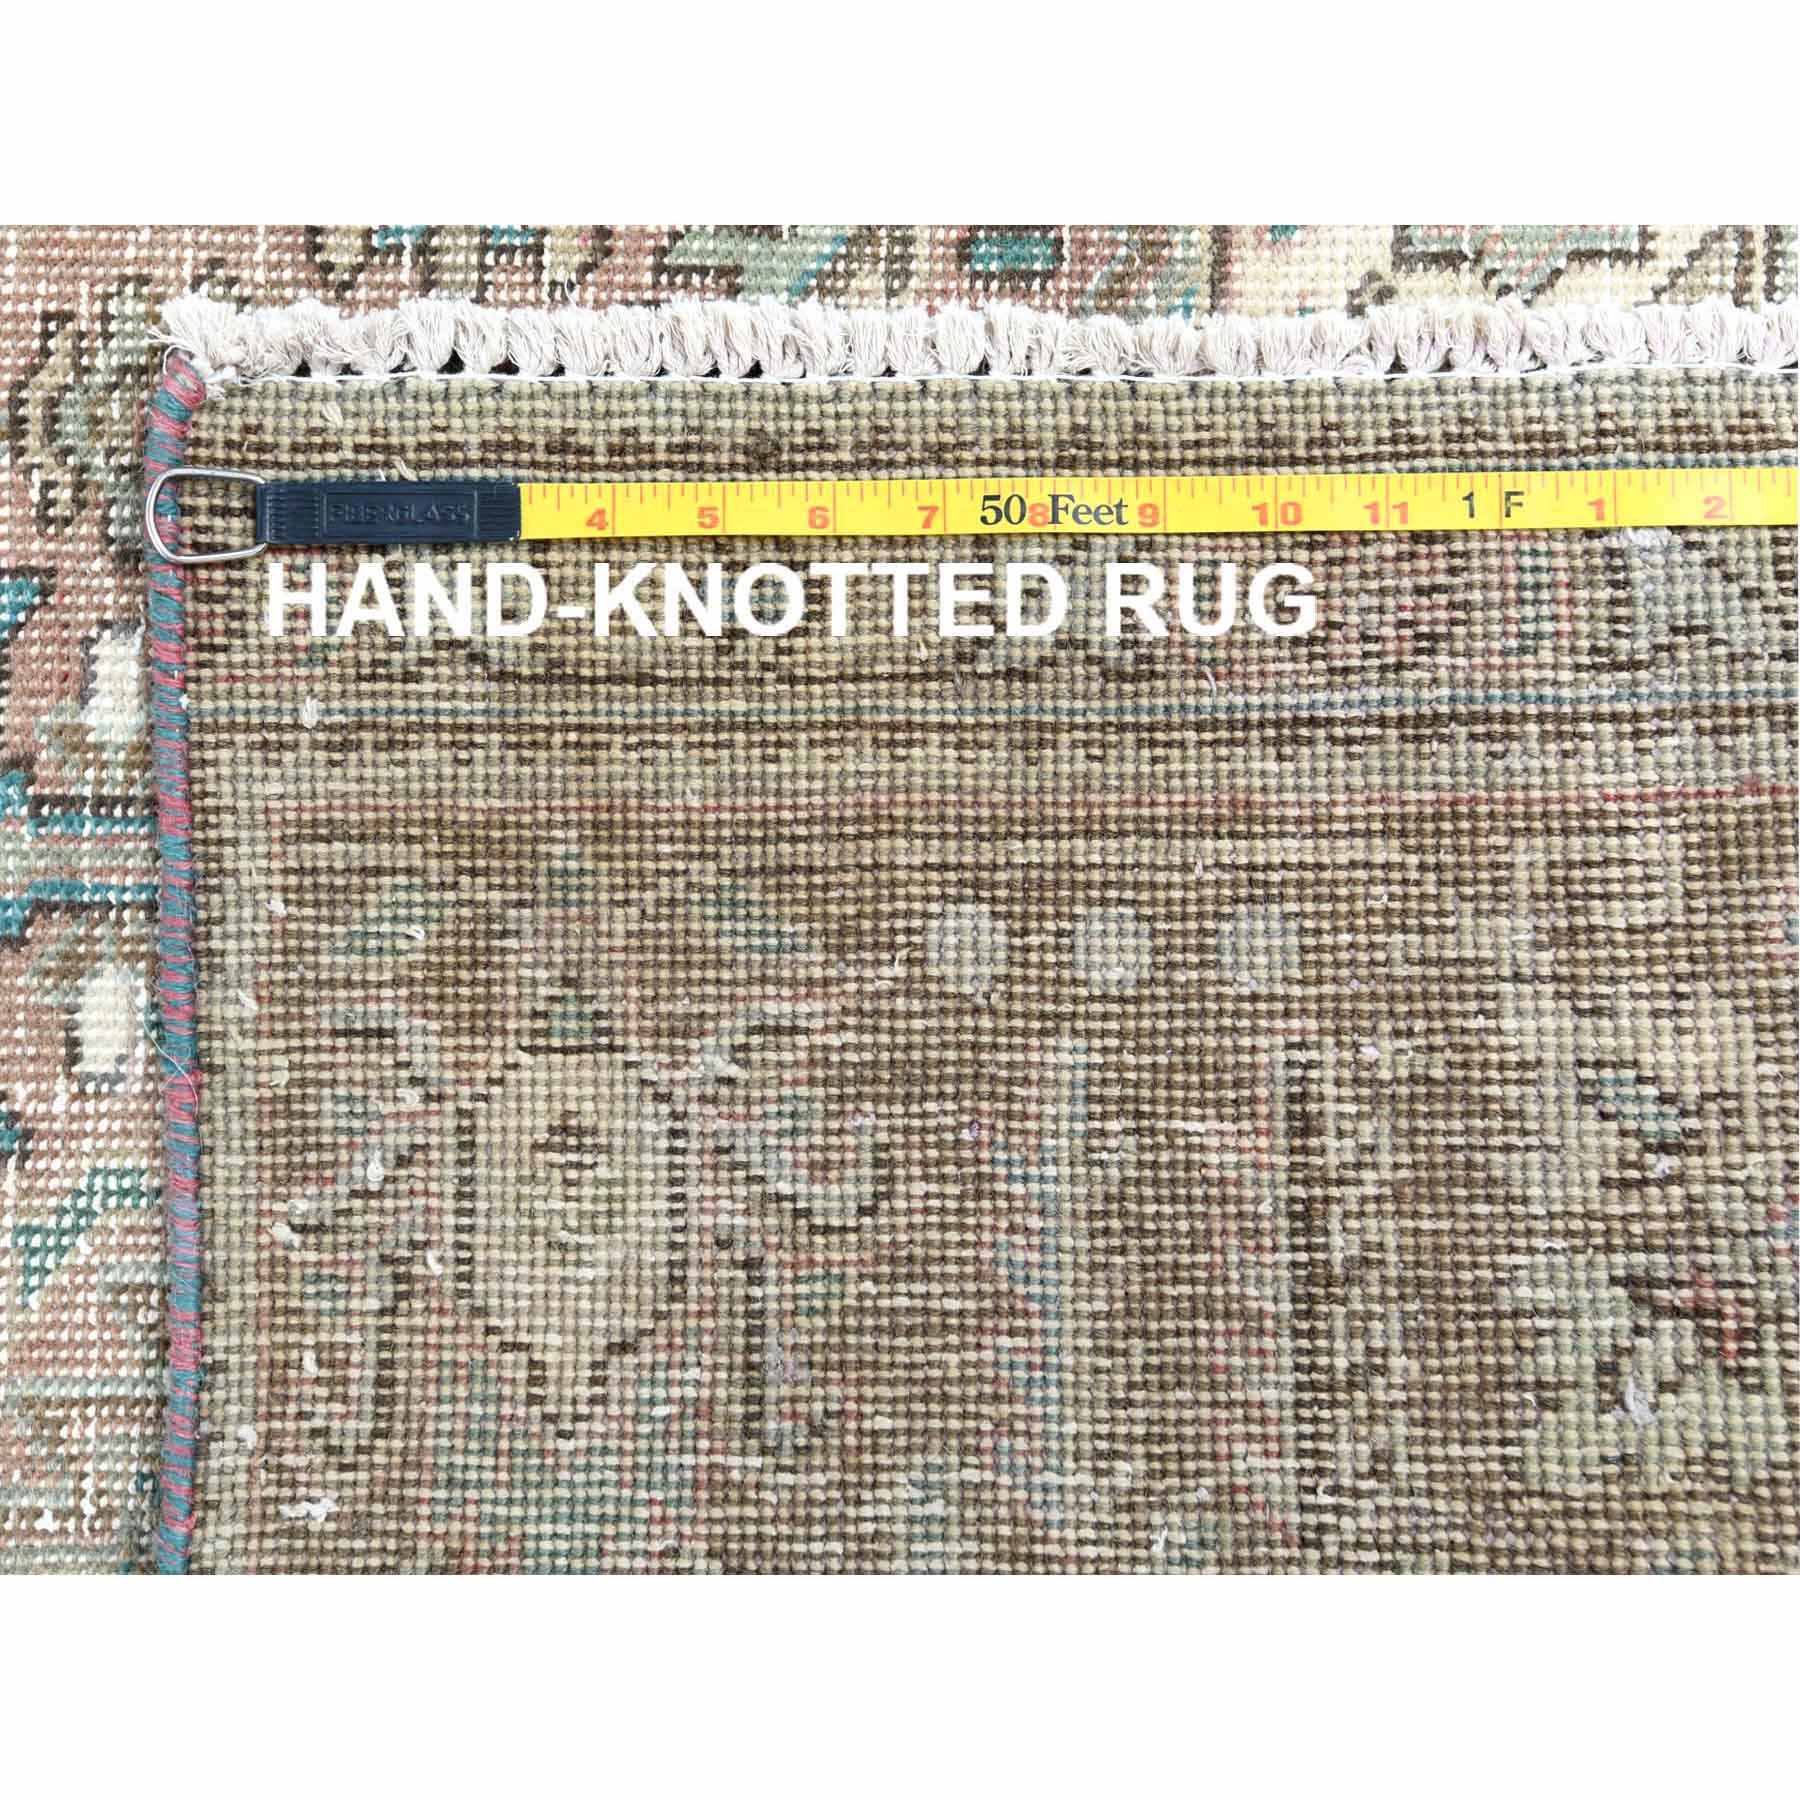 Overdyed-Vintage-Hand-Knotted-Rug-306980